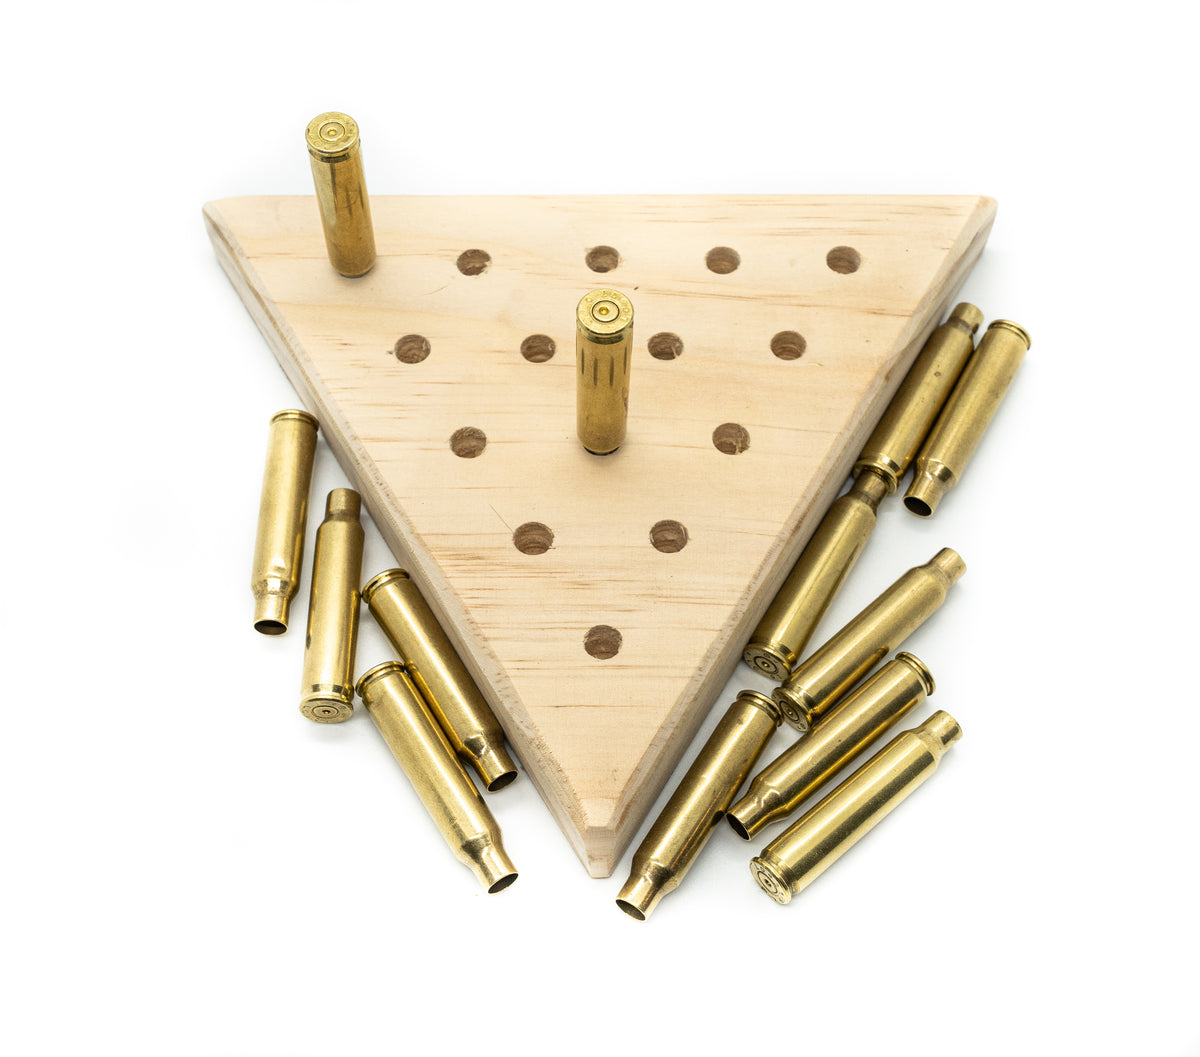 Tricky Triangle - Peg Solitaire - Bullet Peg Game Puzzle - Cracker Barrel Board Game - Wood Jumping Peg Game - Gifts For Kids